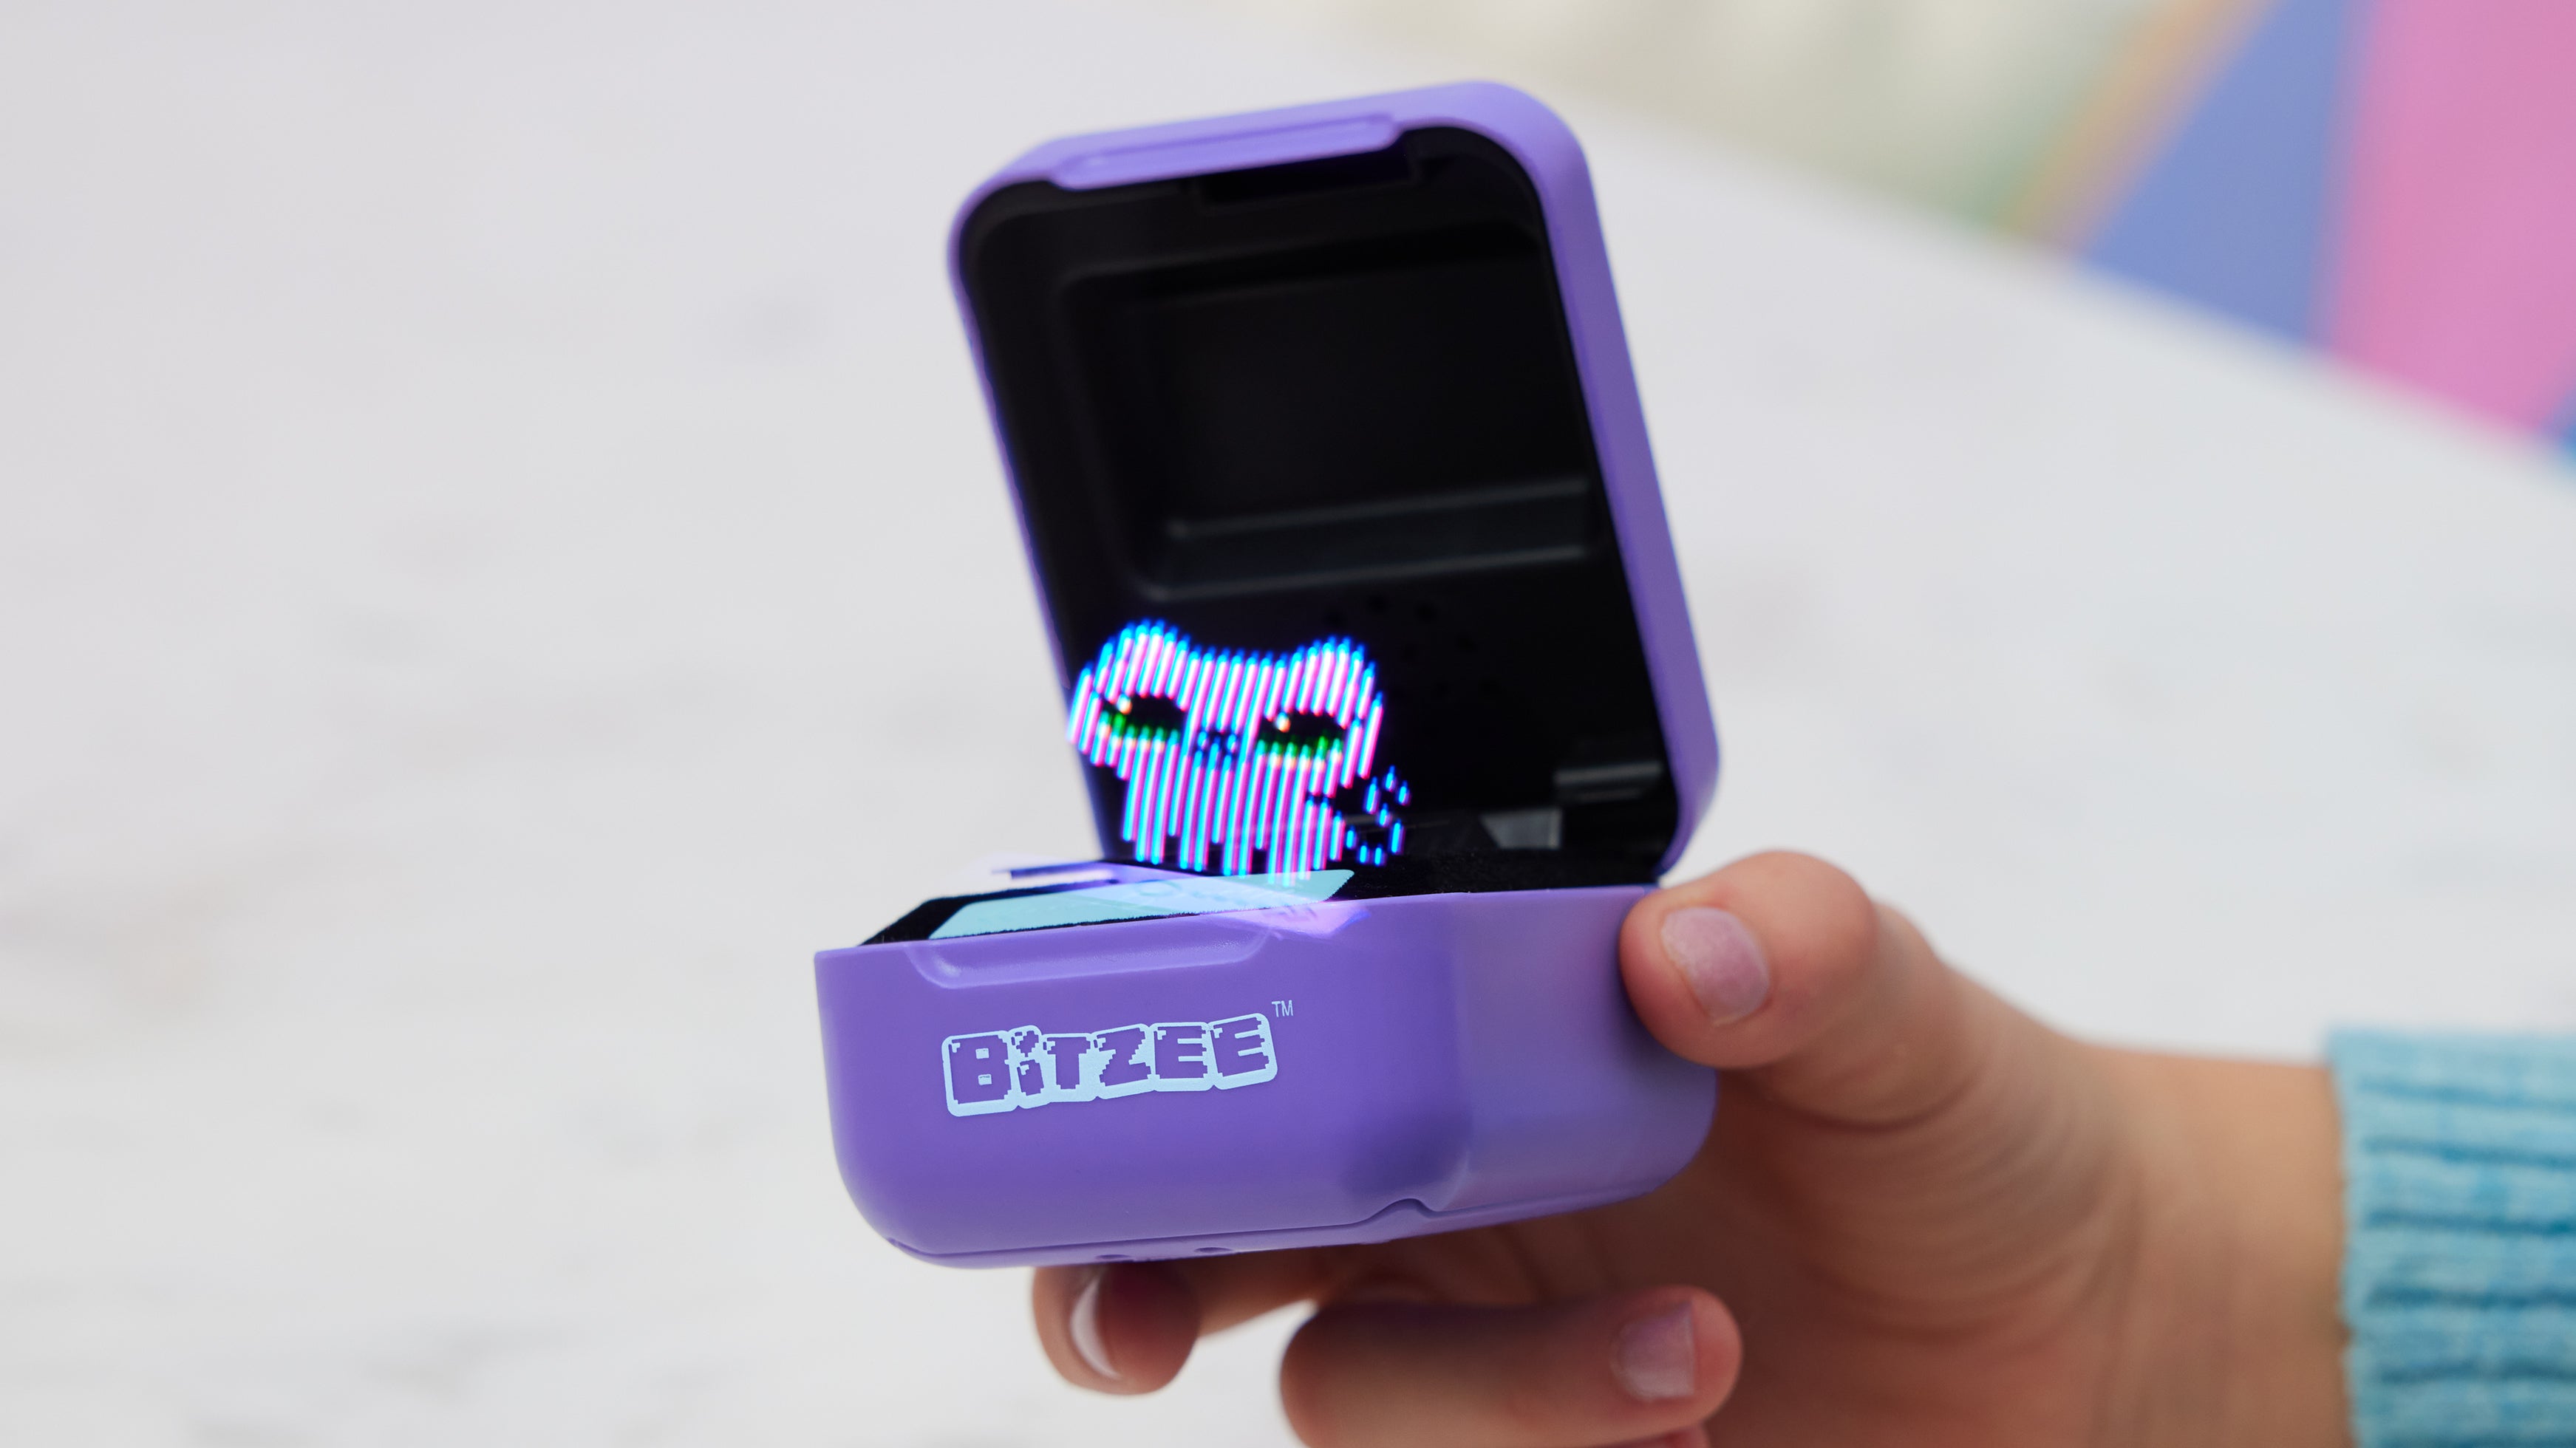 Up to 15 Bitzee digital pets can be unlocked on each device, with extras like games unlocked as they evolve. (Image: Spin Master)